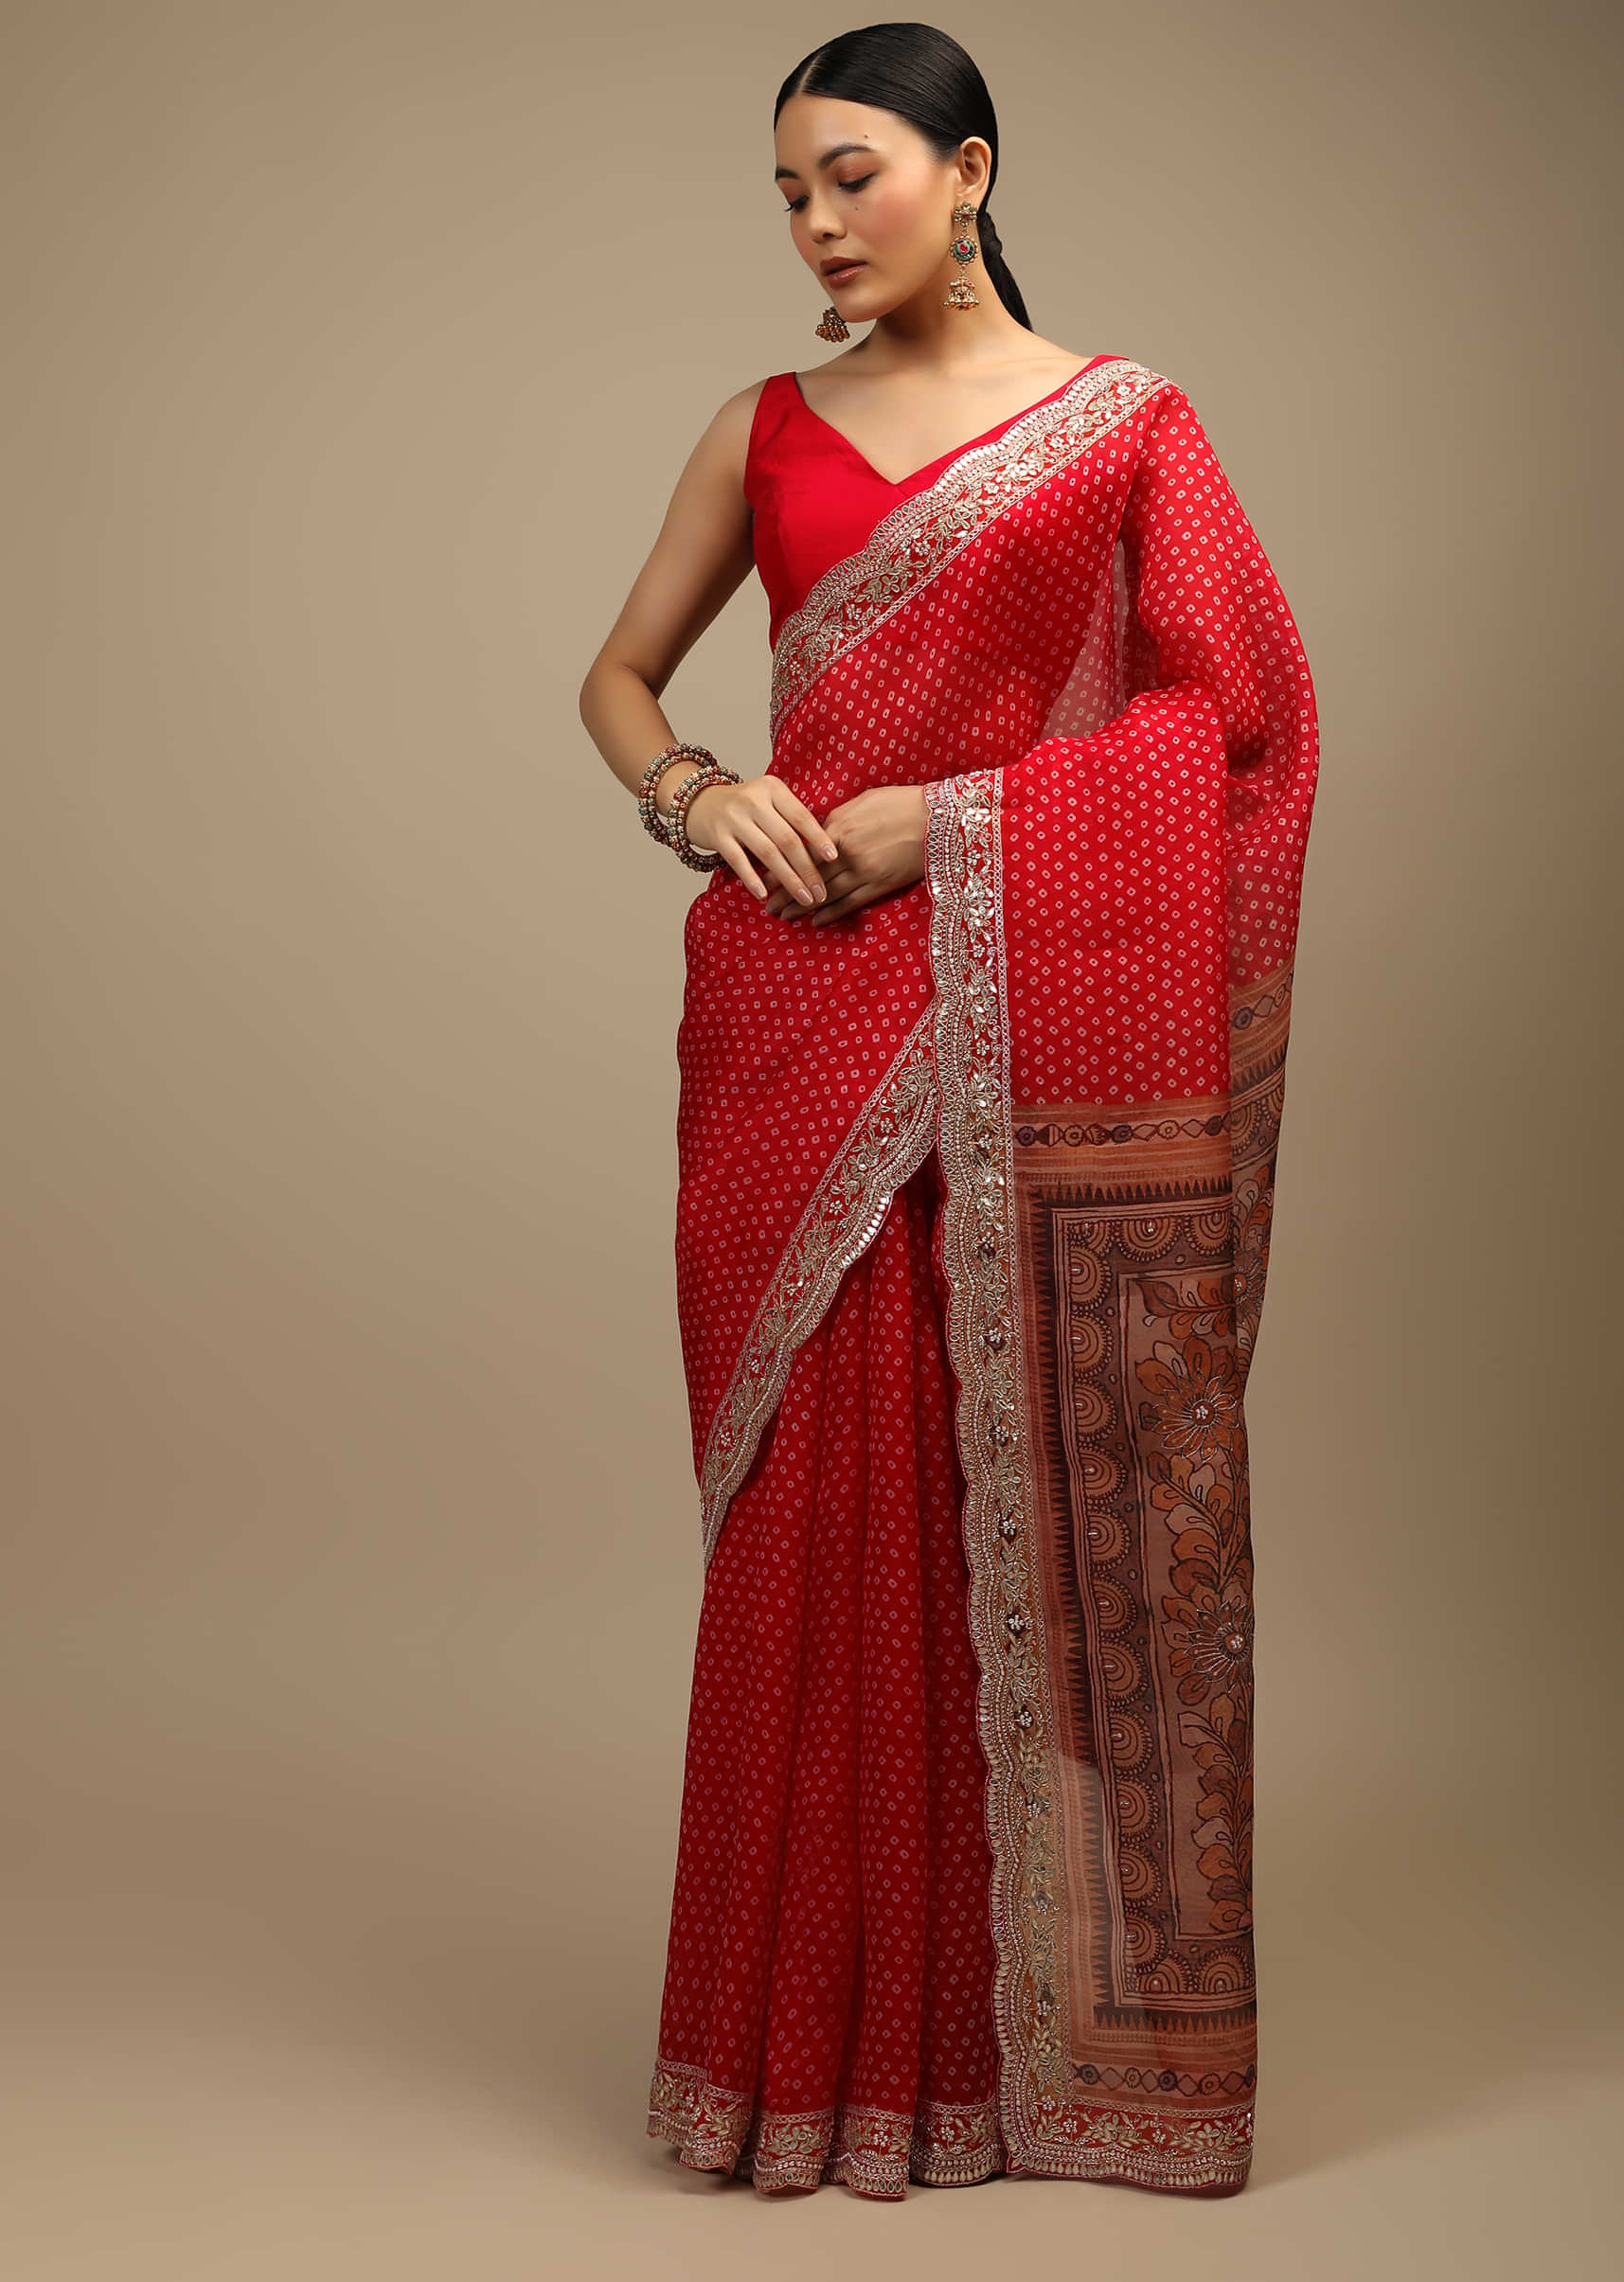 Candy Red Saree In Organza With Bandhani Buttis, Kalamkari Printed Peacock Motifs On The Pallu And Sequins Embroidered Border Online - Kalki Fashion